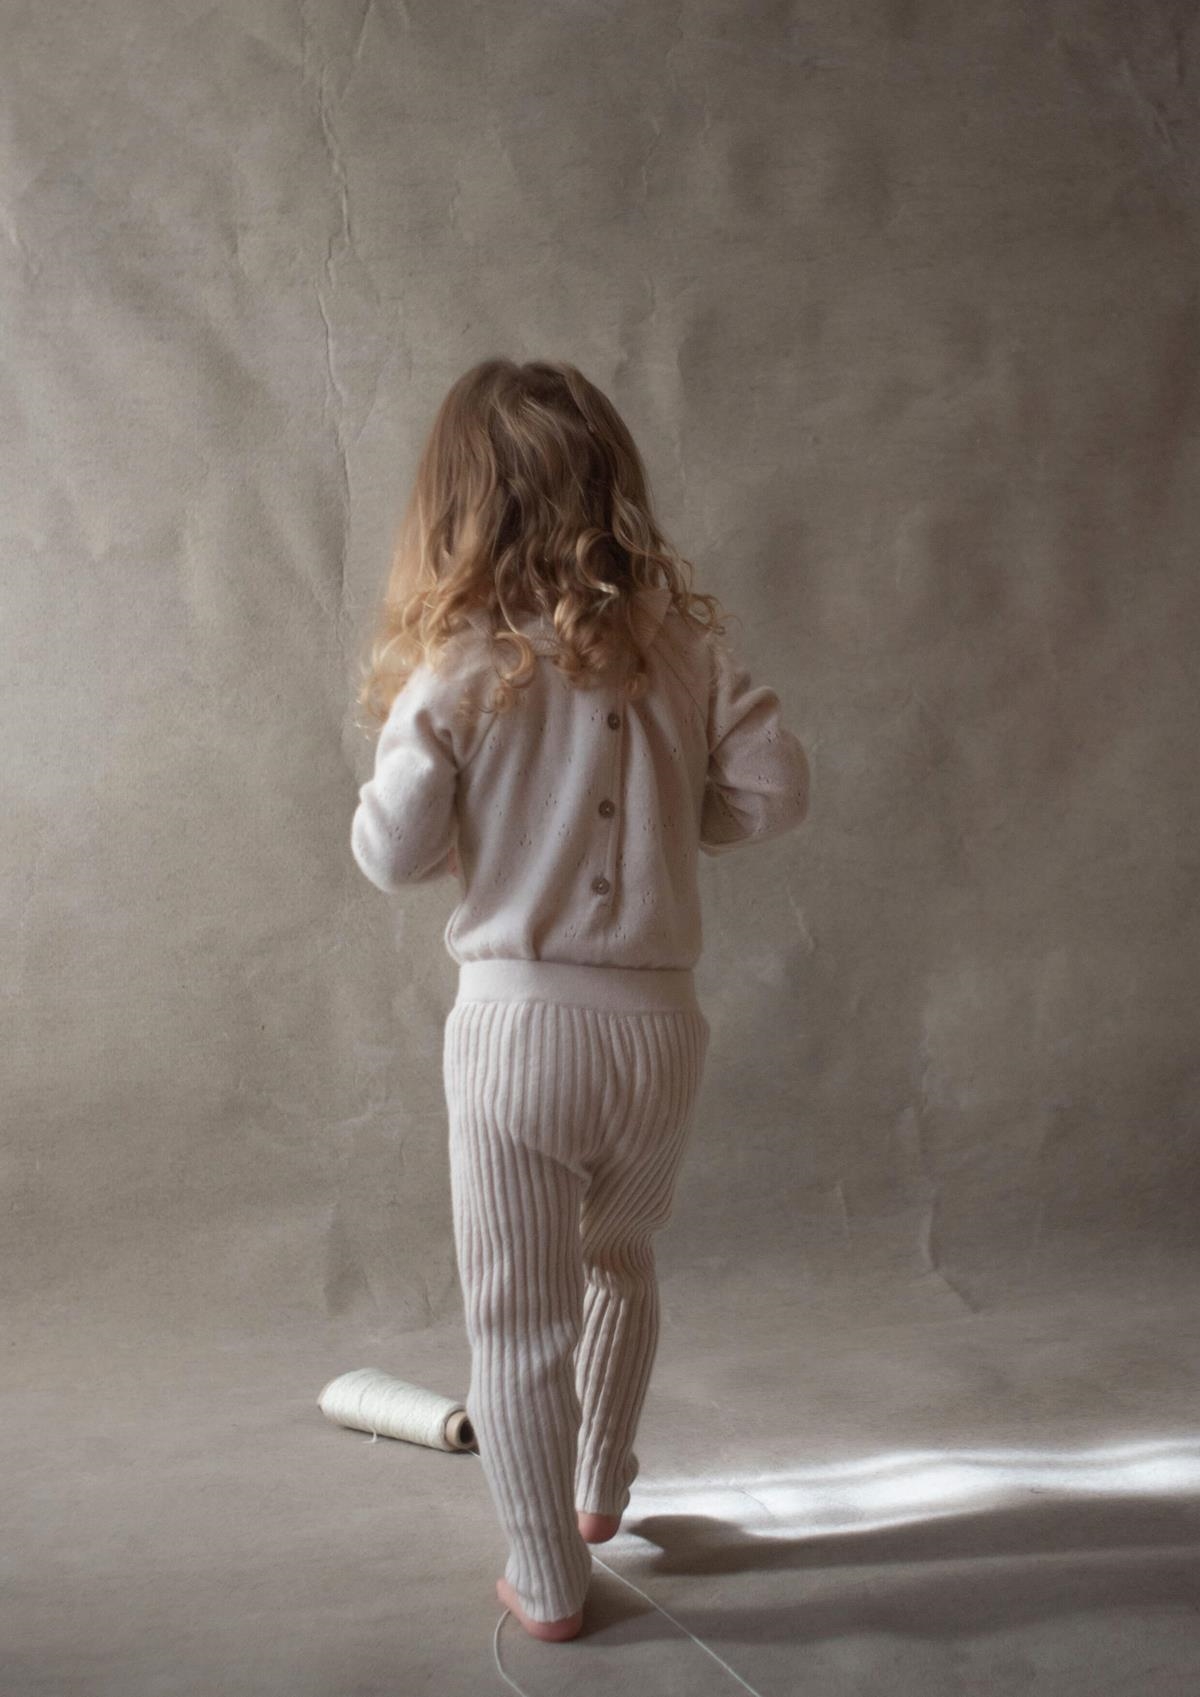 Mod.5.1 Off-white knitted romper suit with frilled collar | AW23.24 Mod.5.1 Off-white knitted romper suit with frilled collar